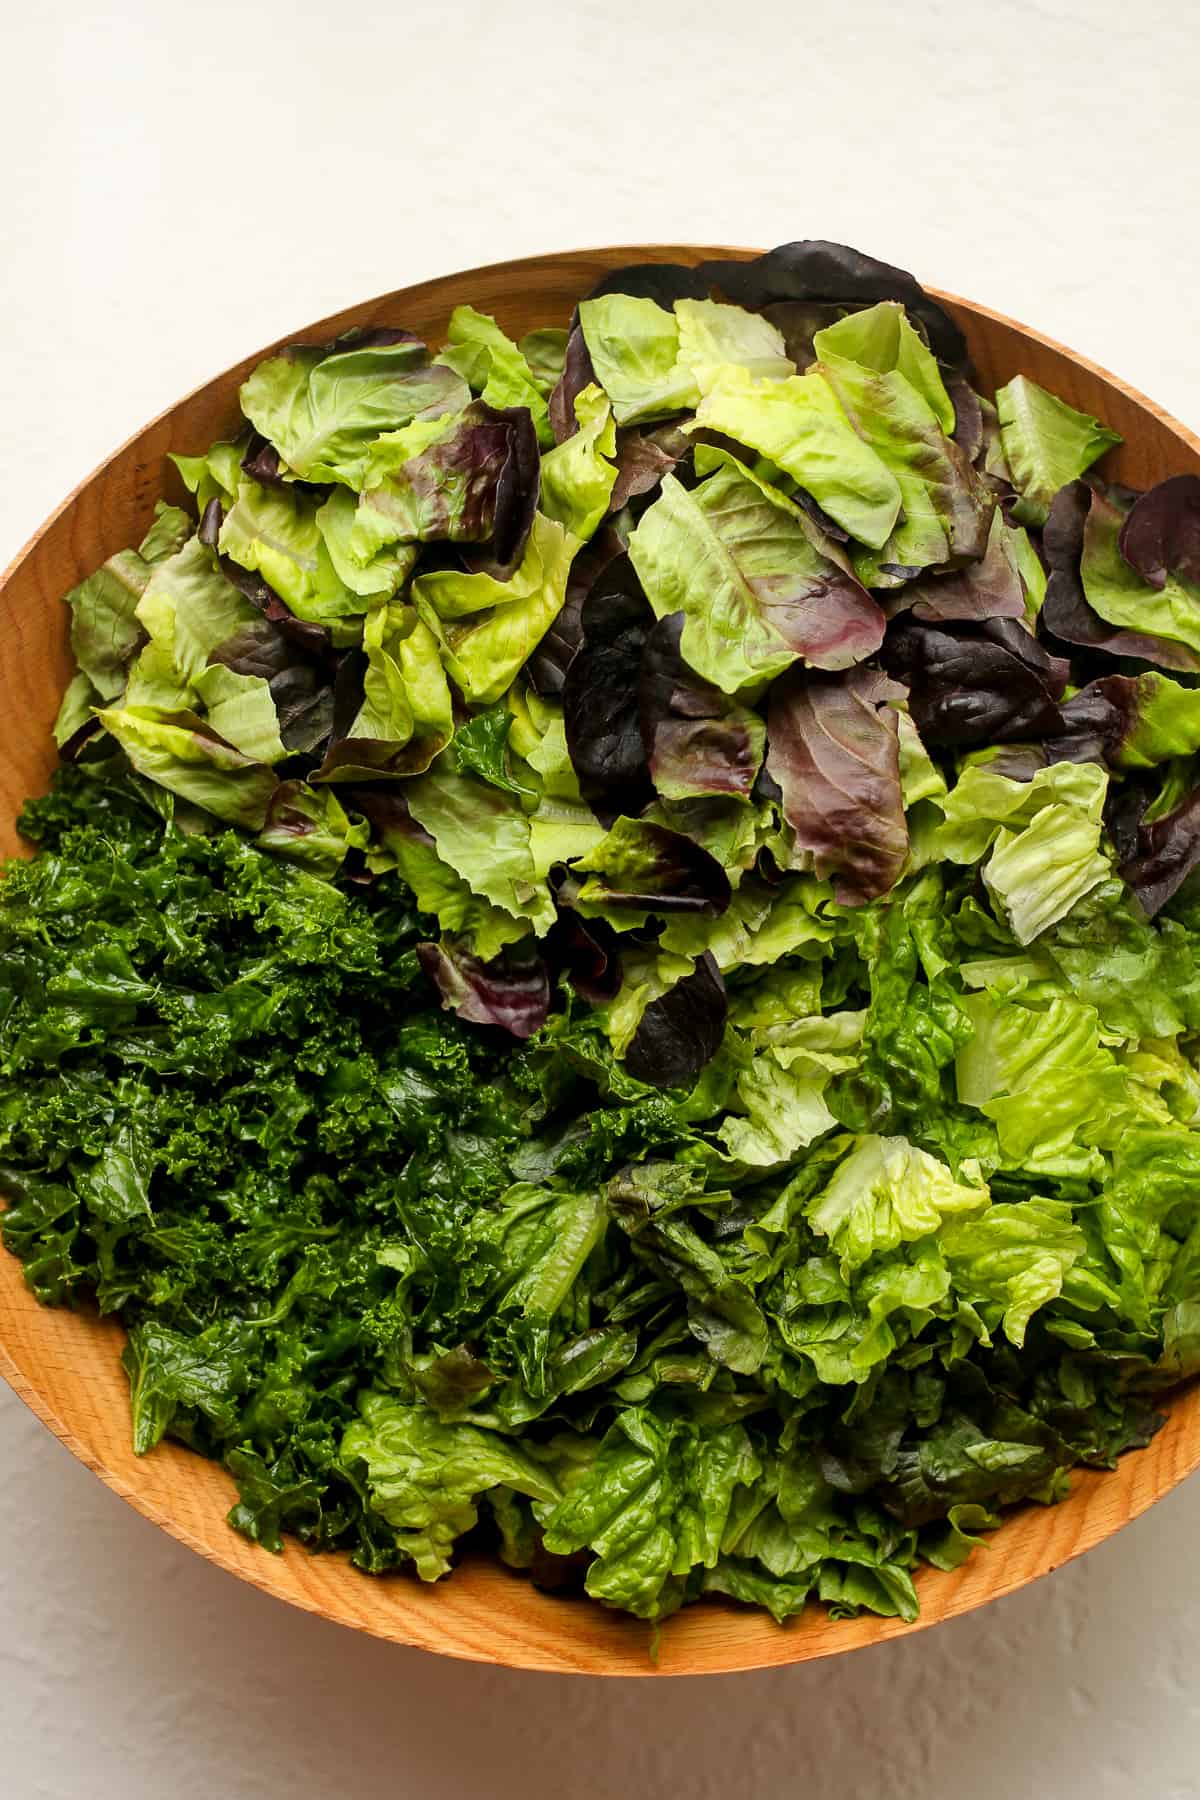 A bowl of the salad greens.